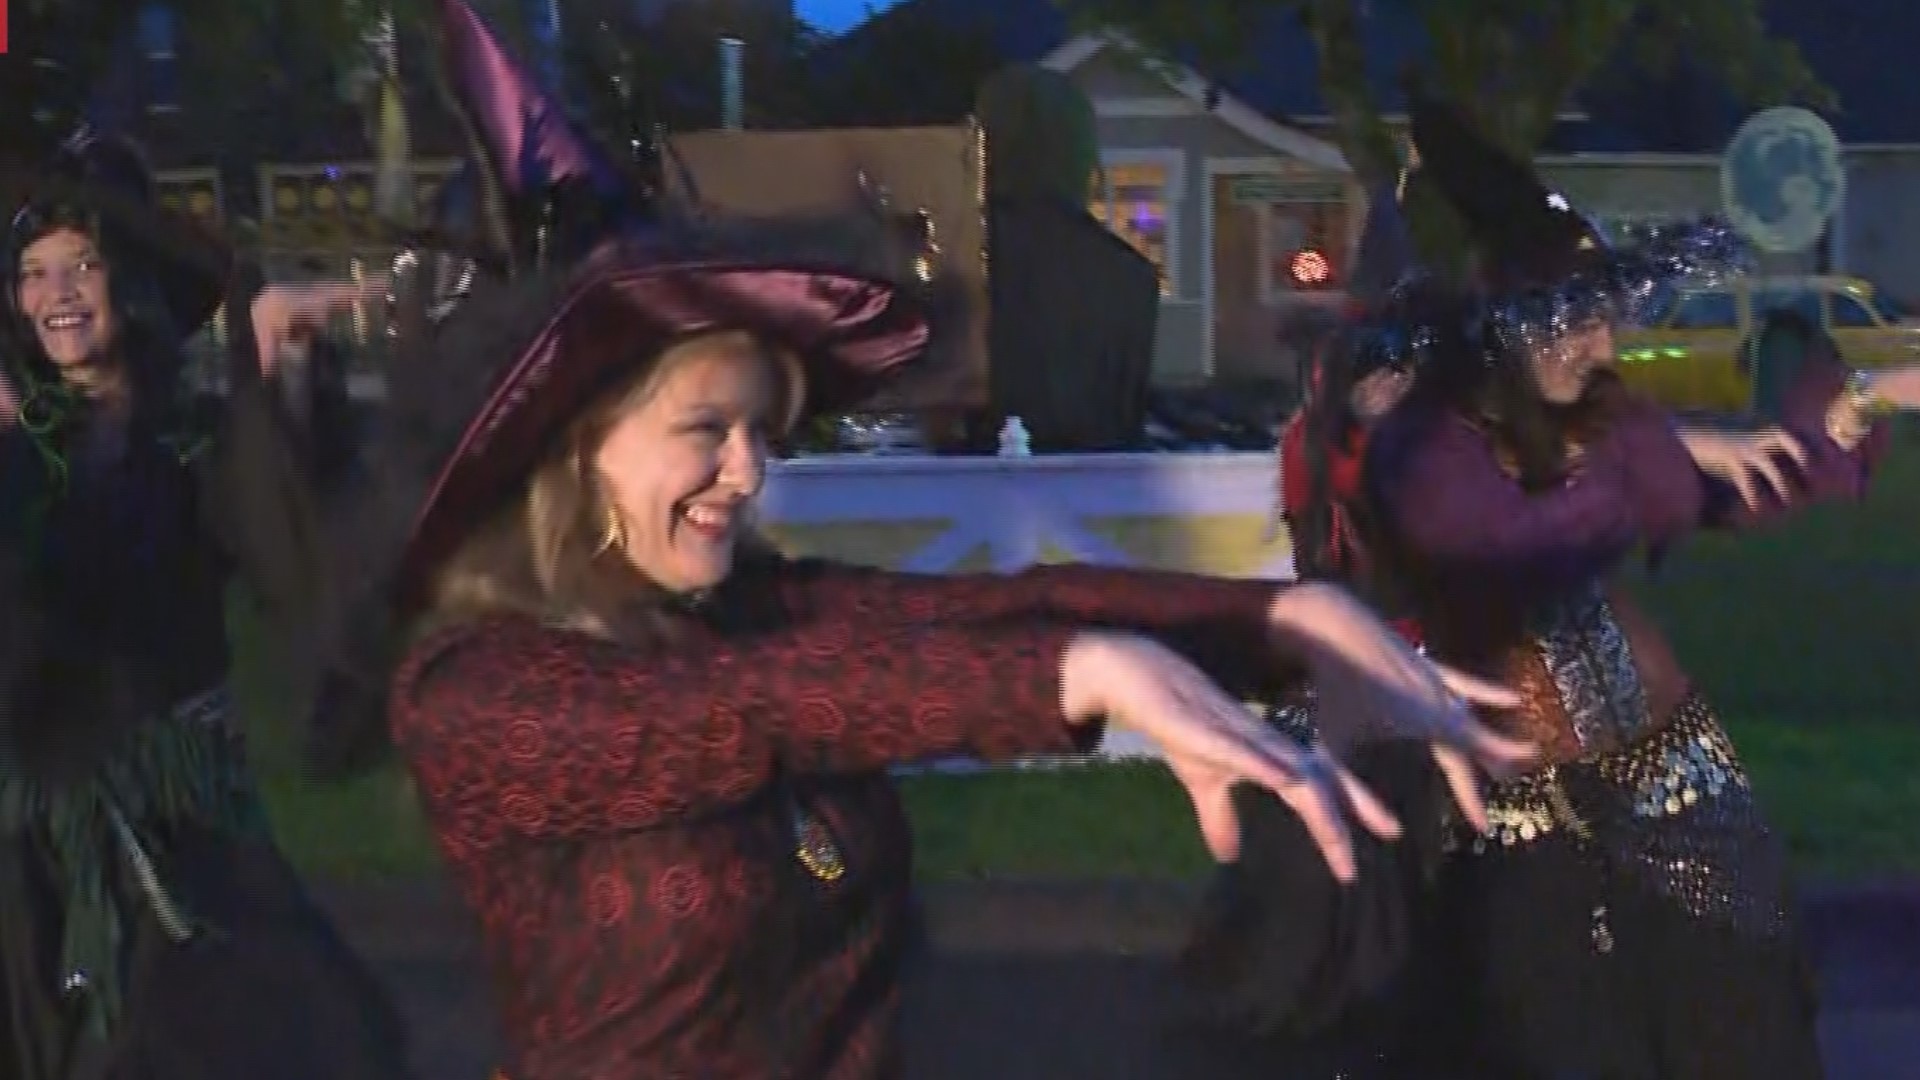 The town of St. Helens, Oregon celebrates Halloween with an event that lasts the entire month of October. Devon Haskins checked out Spirit of Halloweentown.